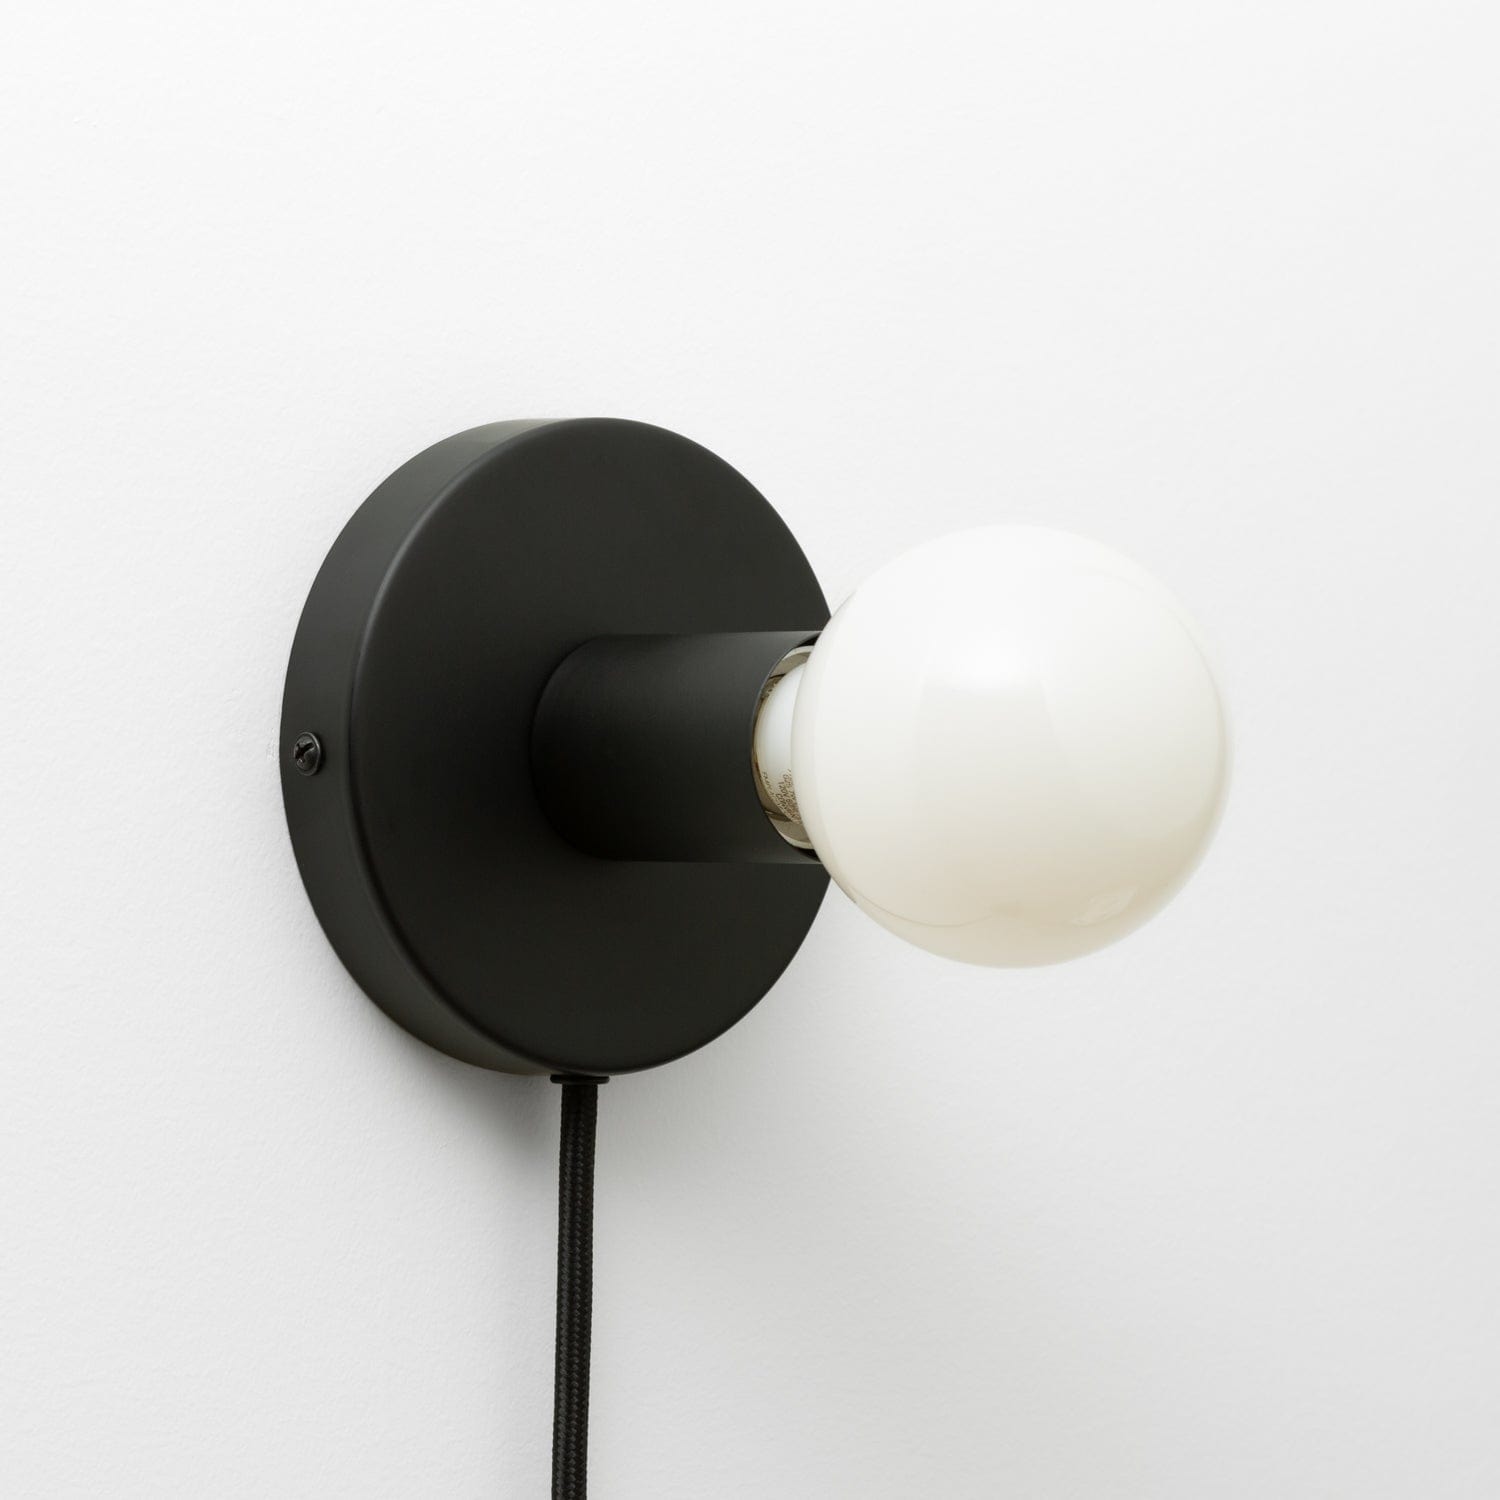 Button Plug-In Sconce in Matte Black finish with G25 light bulb